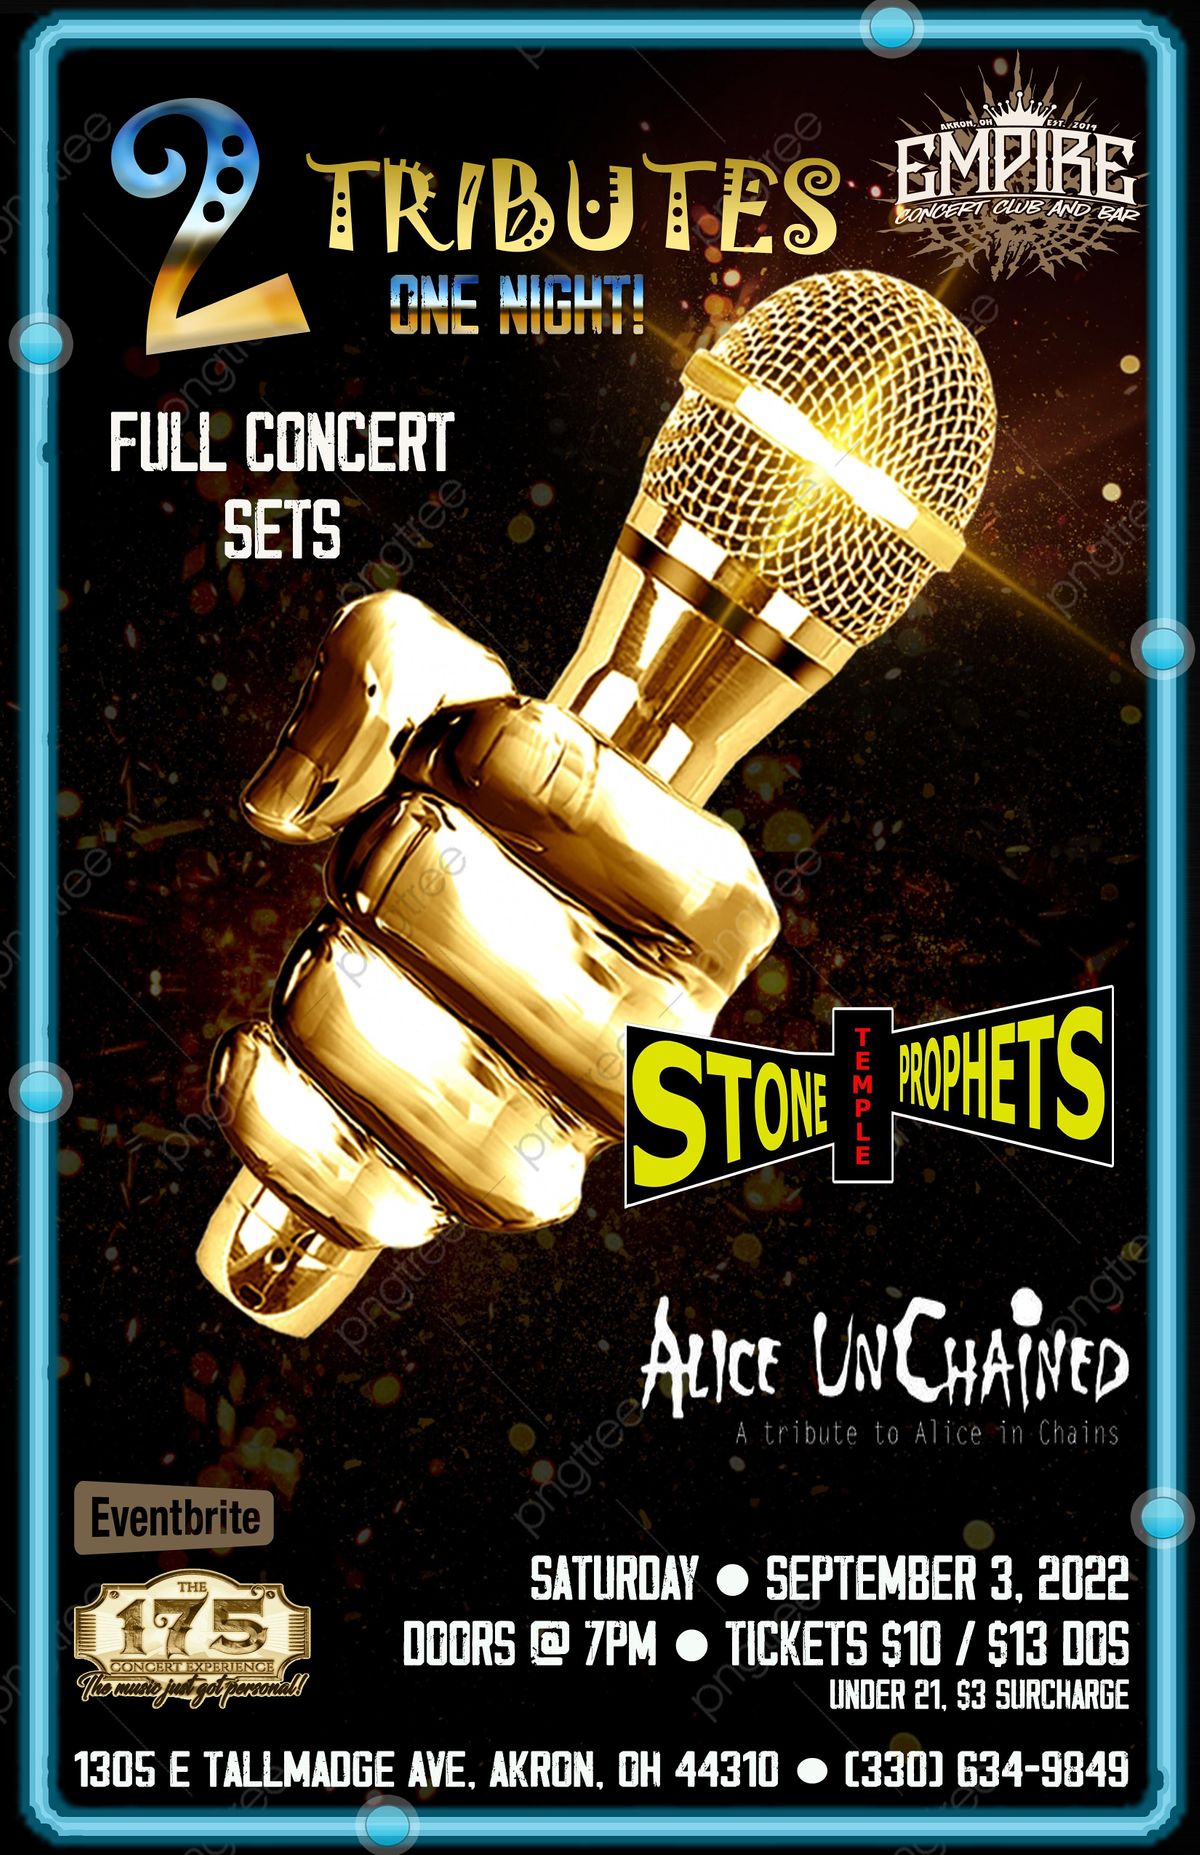 Stone Temple Prophets & Alice UnChained at The Empire!